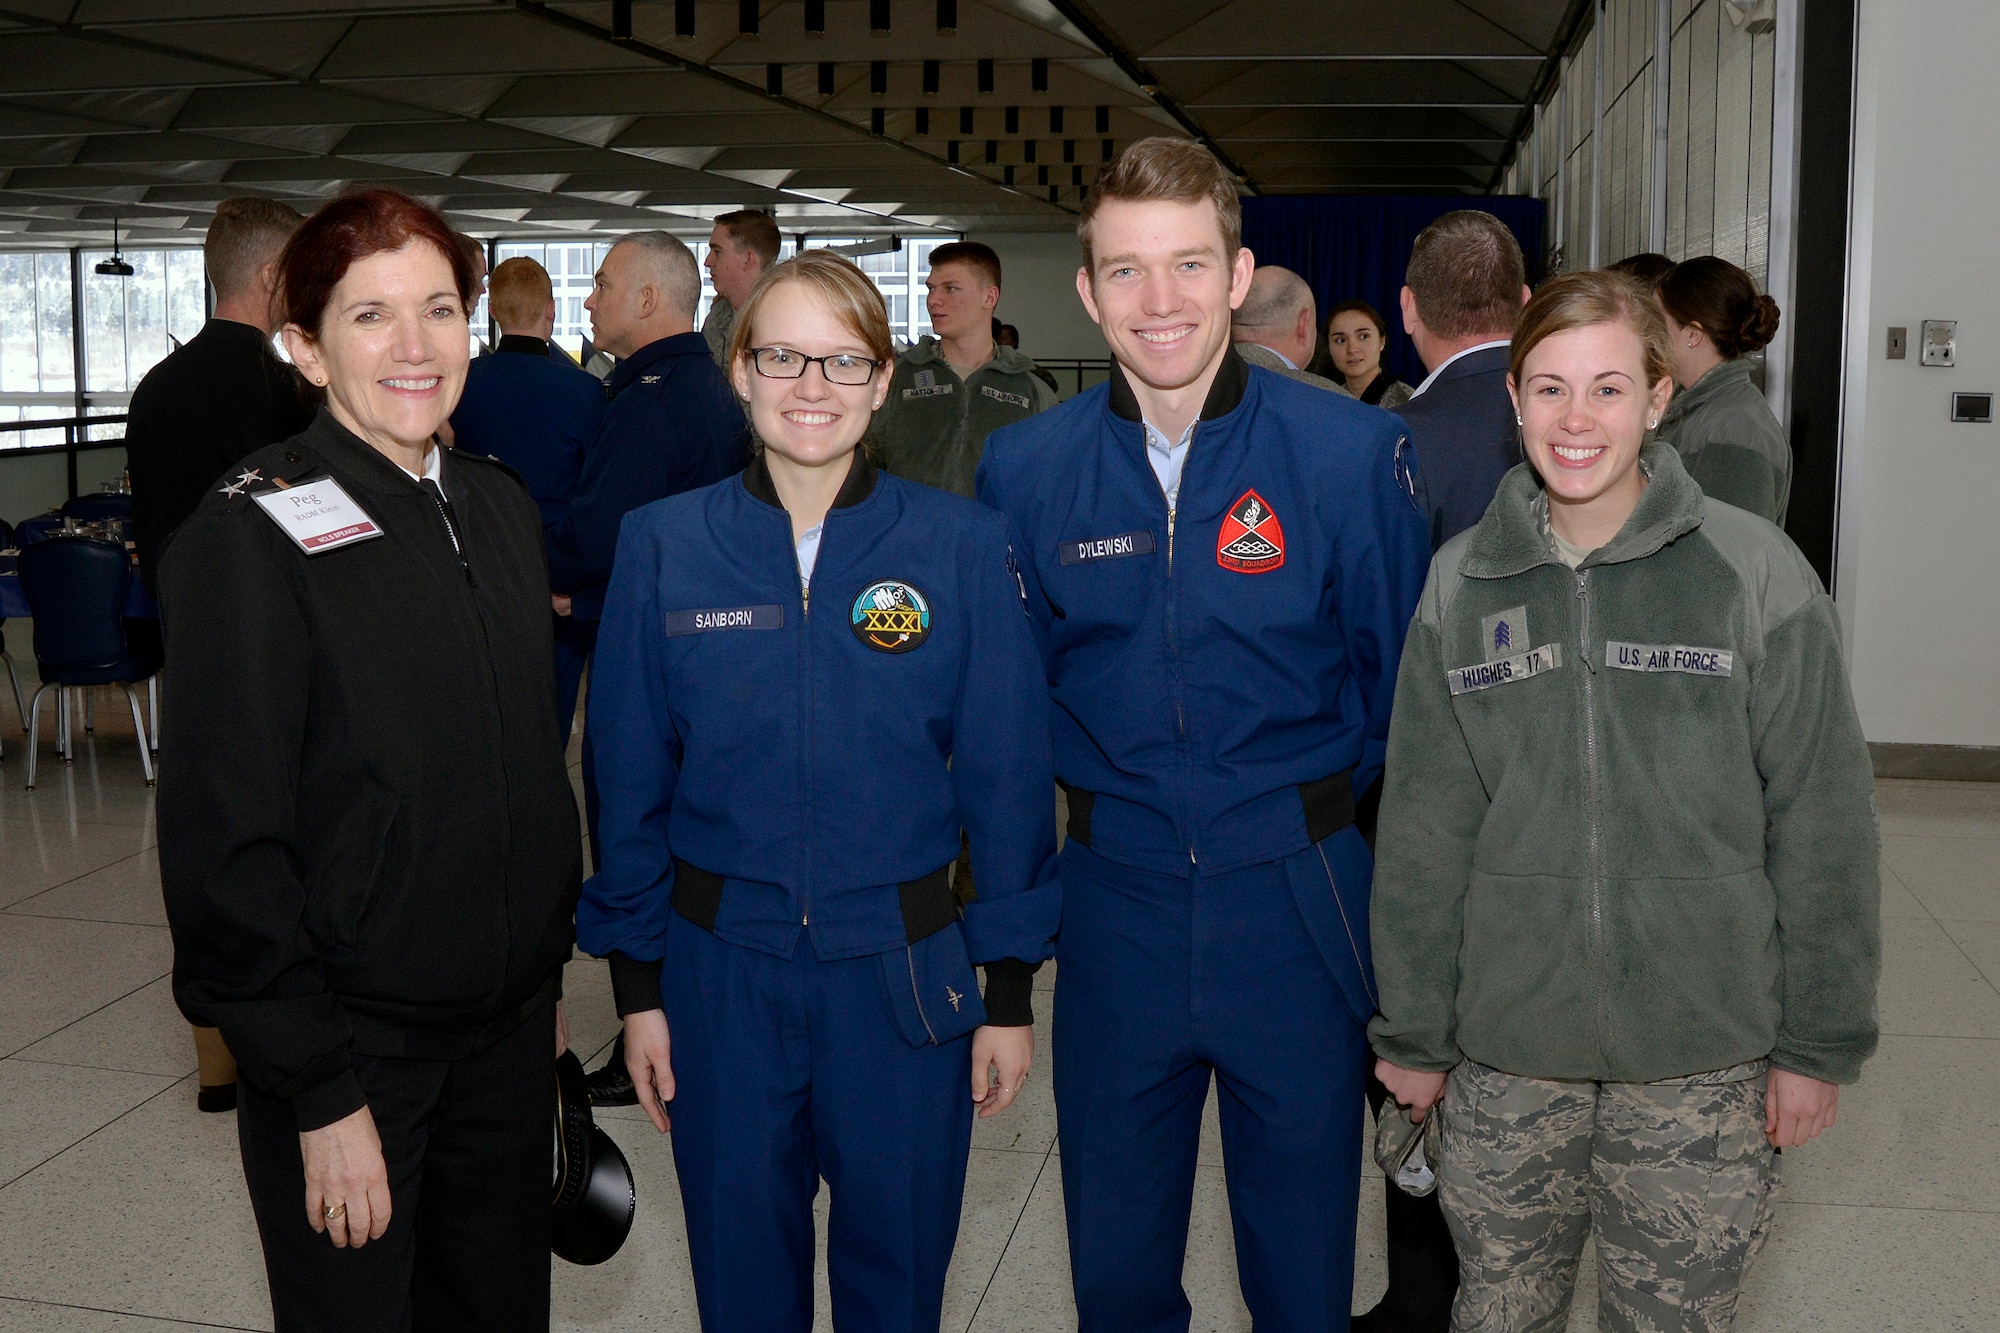 Rear Adm. Margaret Klein, the Defense Department's senior advisor for Military Professionalism, stands with three cadets at the U.S. Air Force Academy, Feb. 23, 2016. Klein visited the Academy to introduce the DOD's inaugural Professionalism Summit hosted by the Academy, Feb. 23-24. (U.S. Air Force photo/Jason Gutierrez)